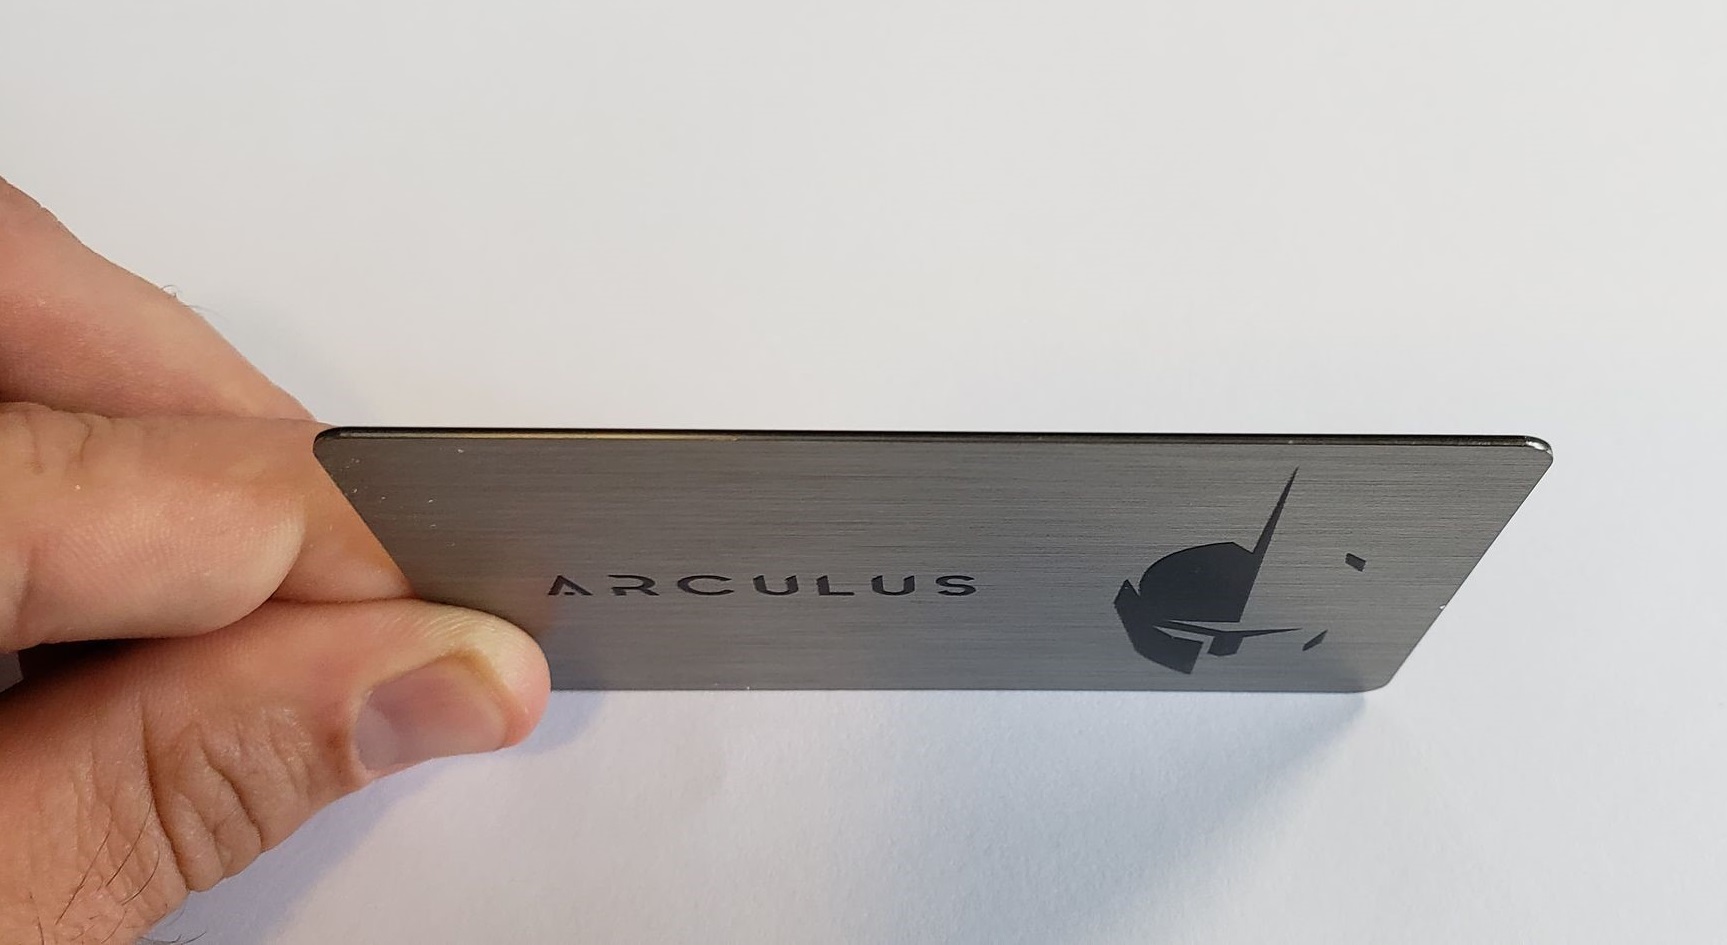 Side view of the arculus wallet